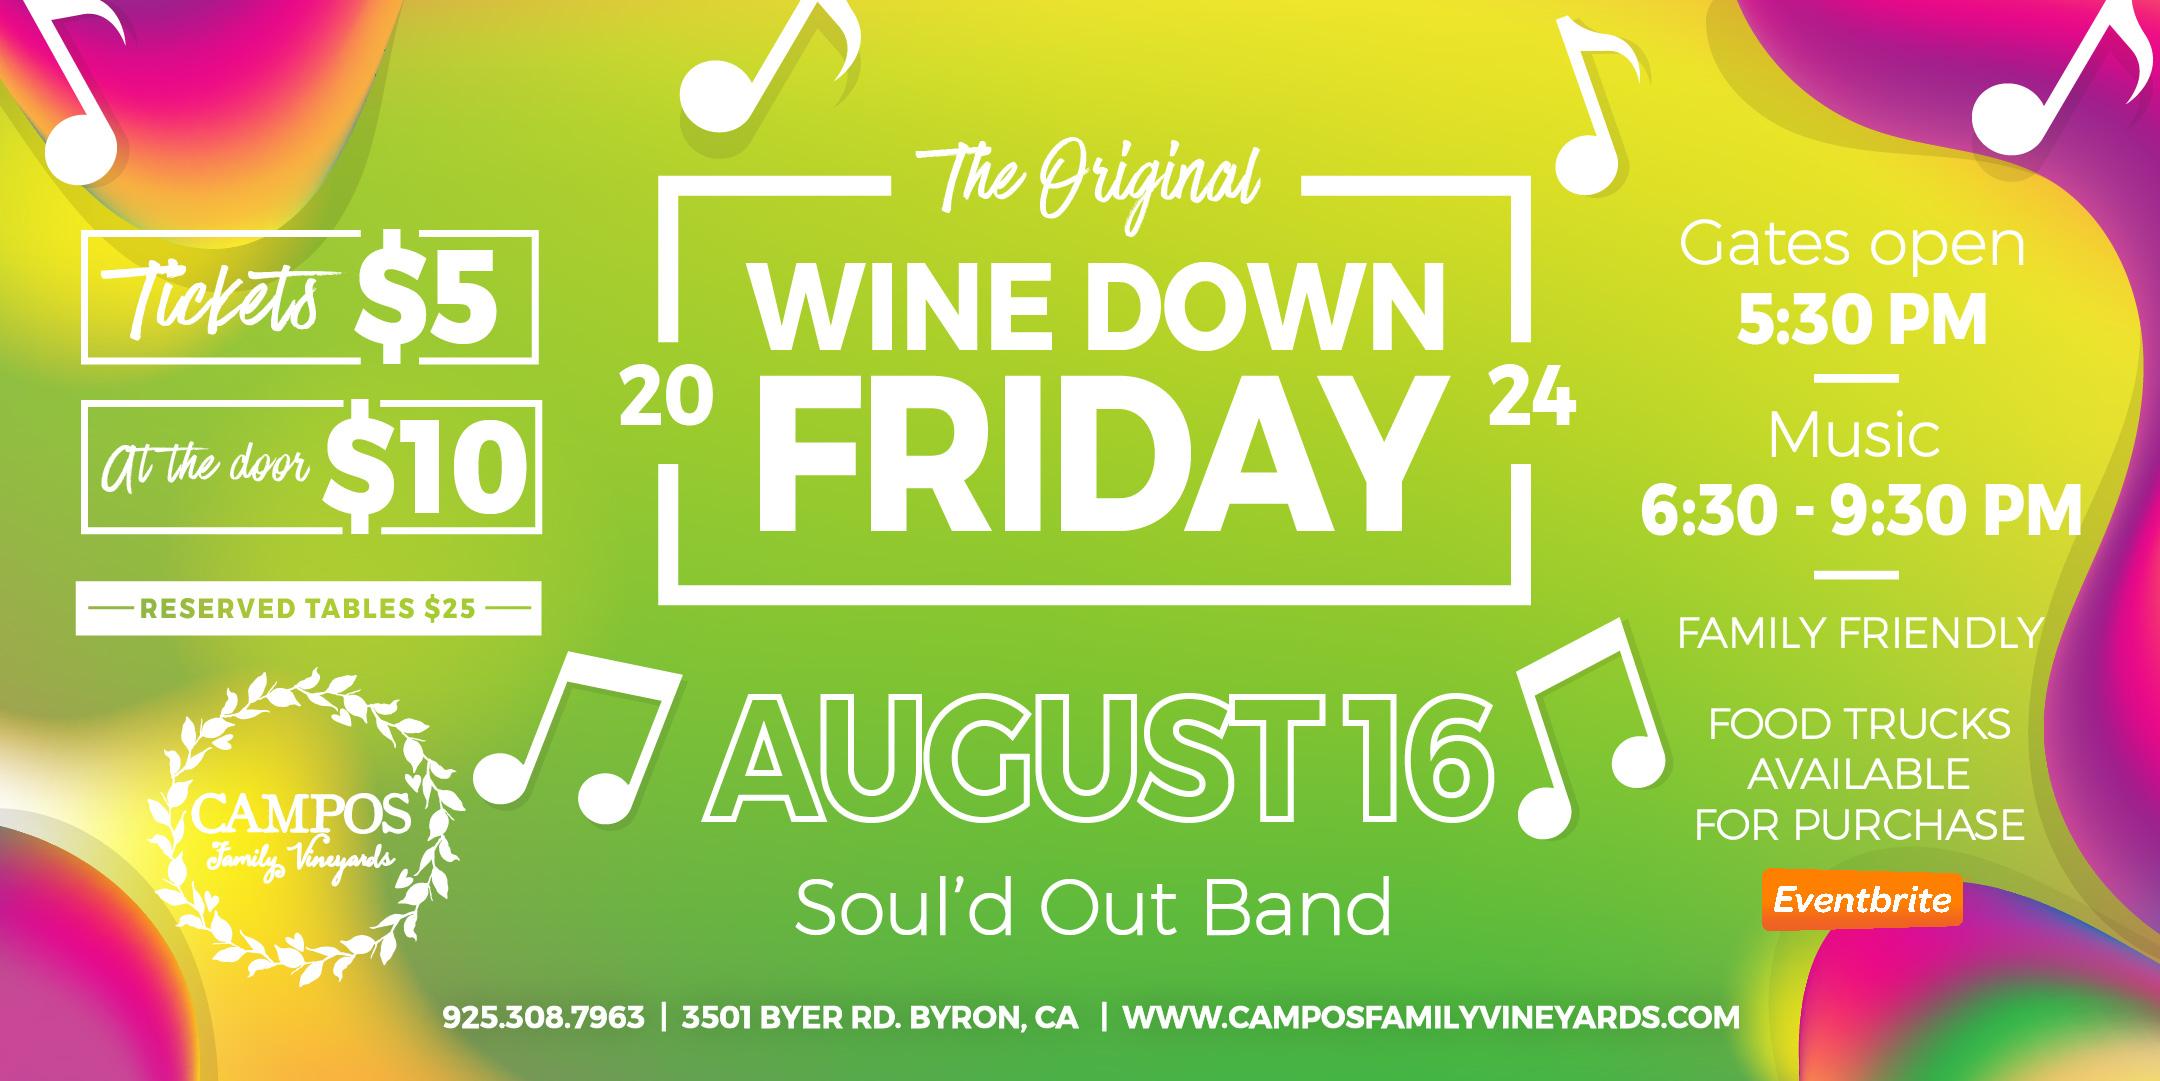 The Original Wine Down Friday - Soul'd Out Band